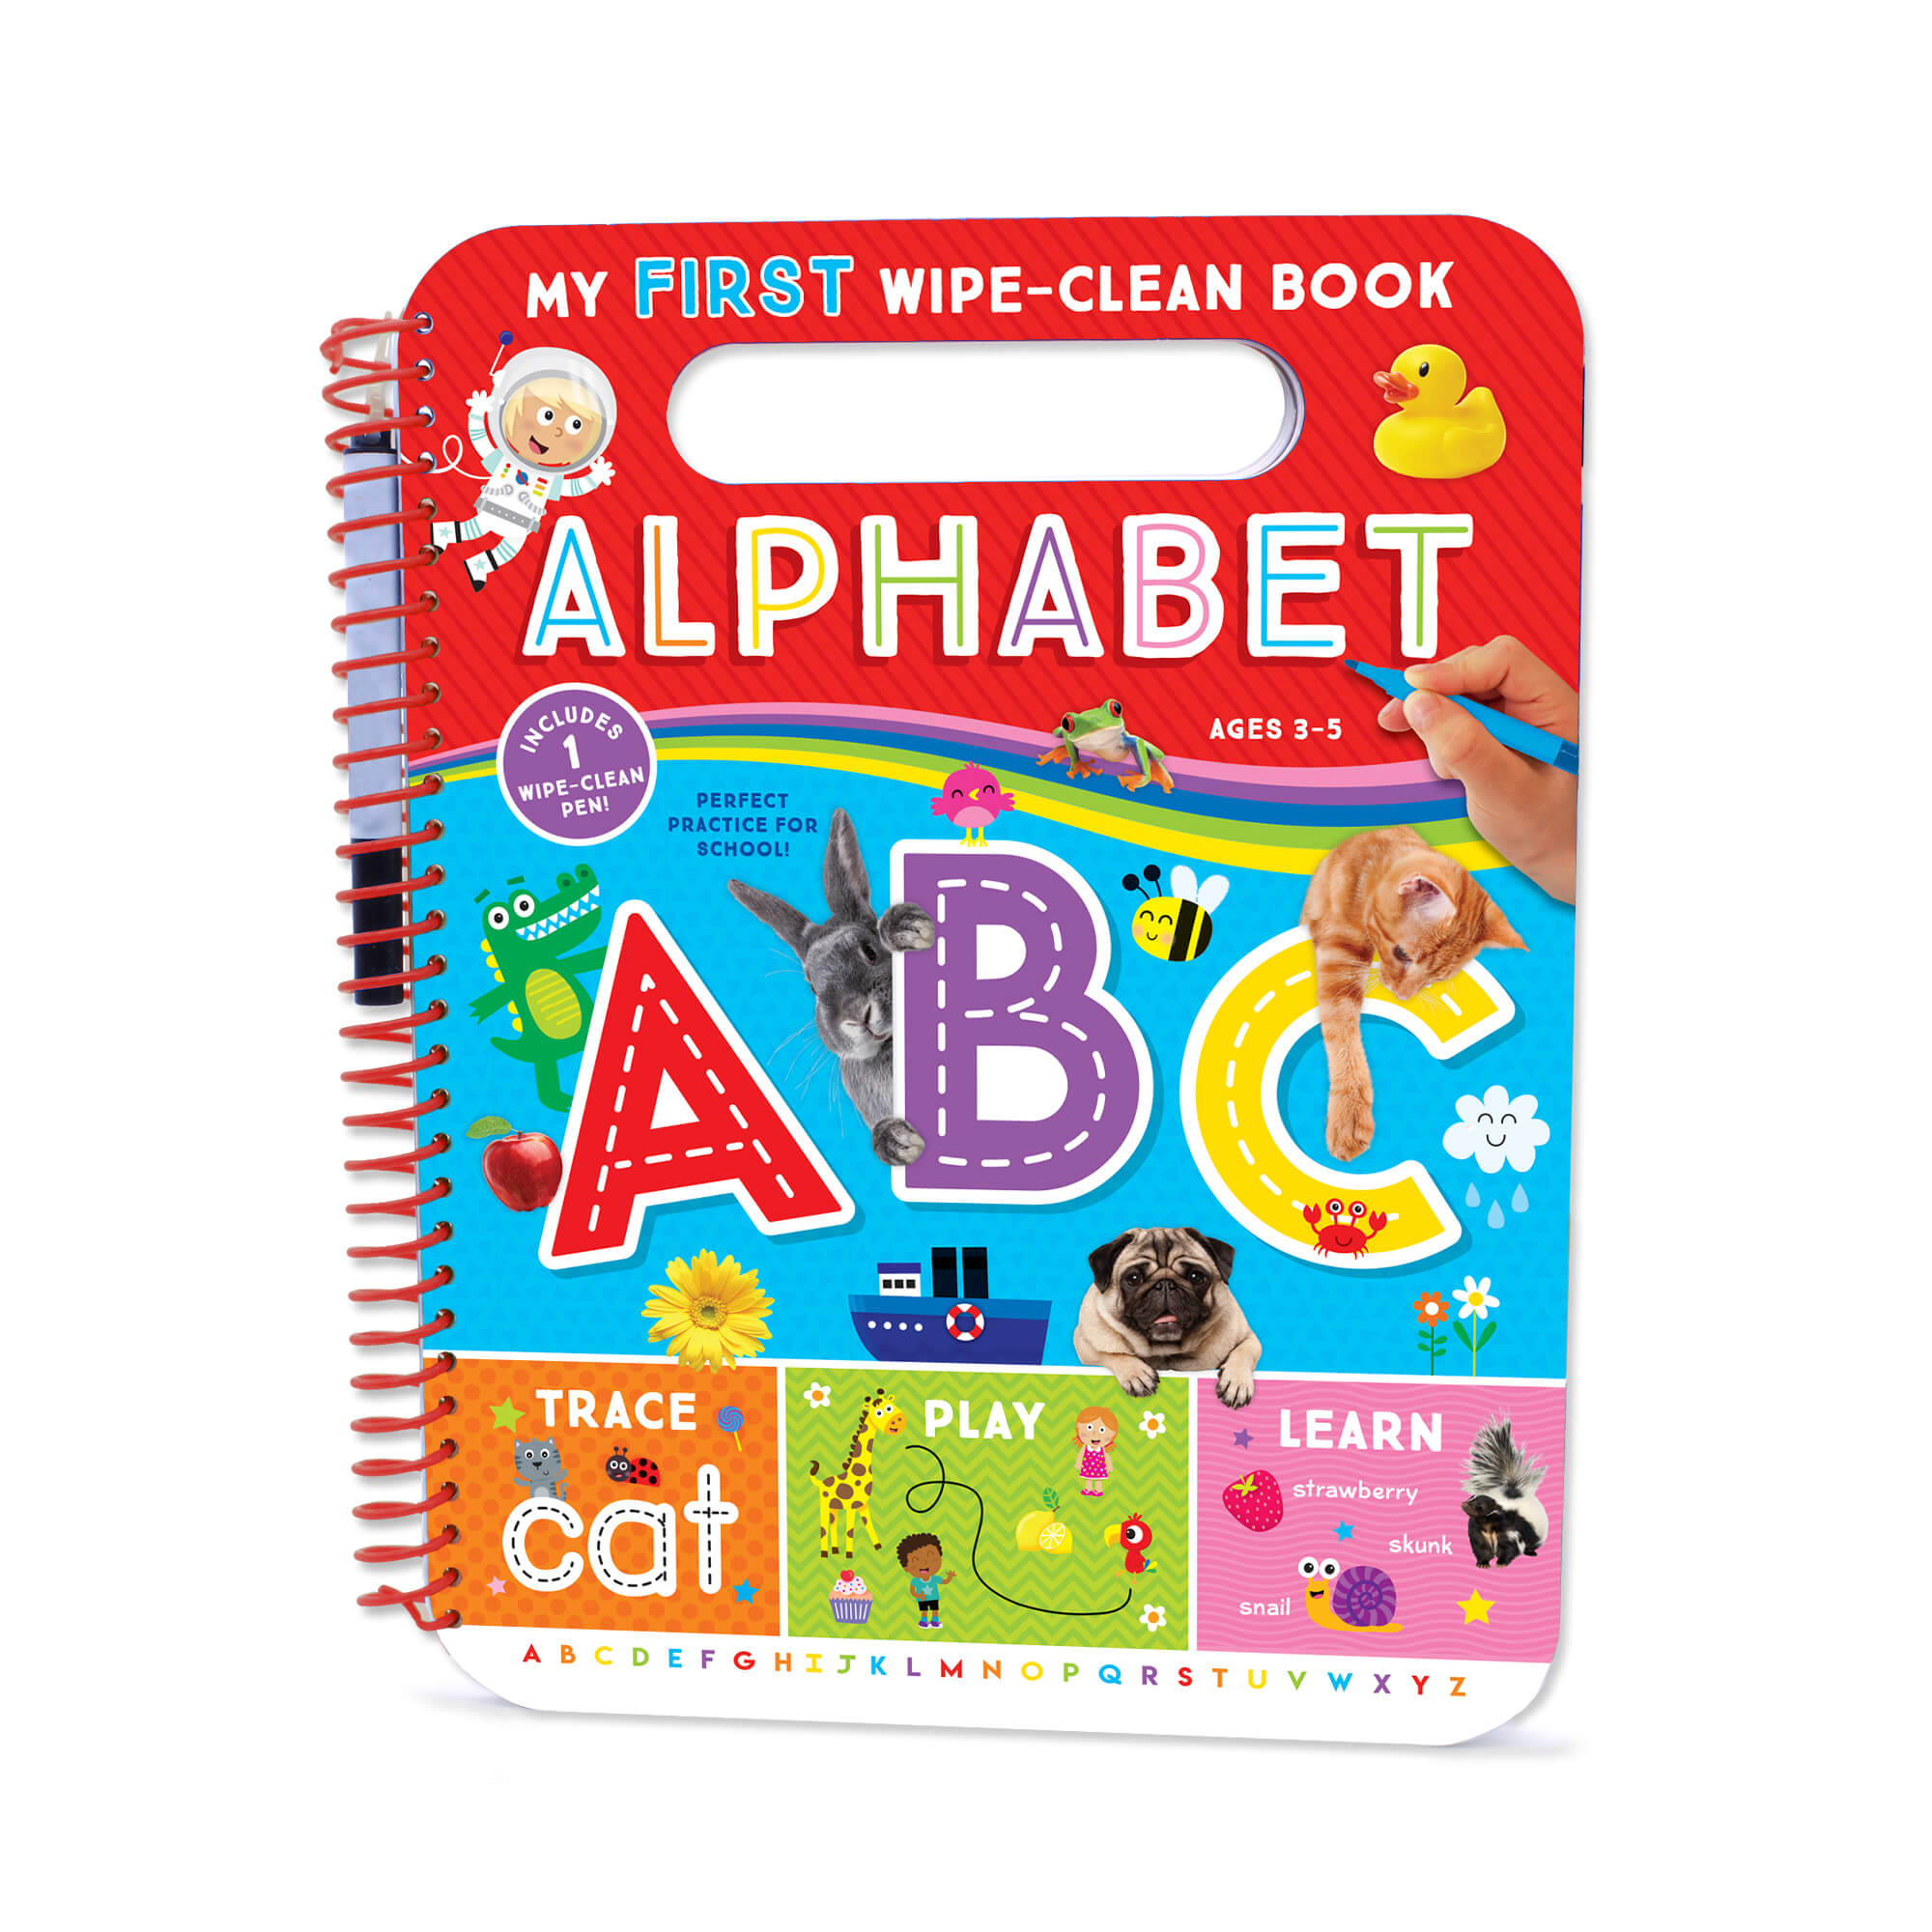 Fun With ABC Board Book for Children Age 0 -2 Years |Fun Size Board Book to  Learn Alphabet - Kiddy Board Book Series